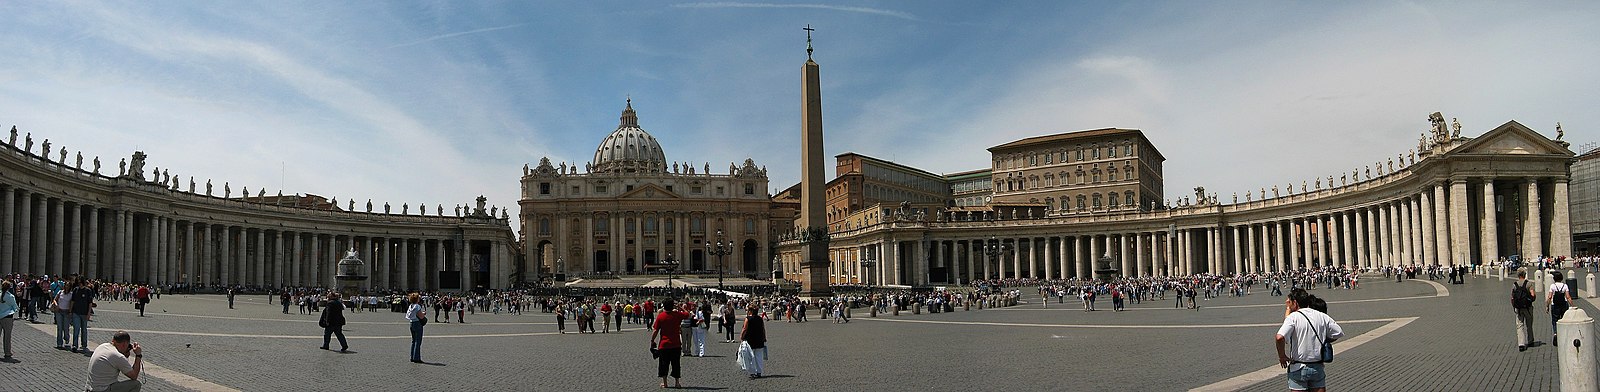 Saint Peters at the Vatican square surrounded by columns